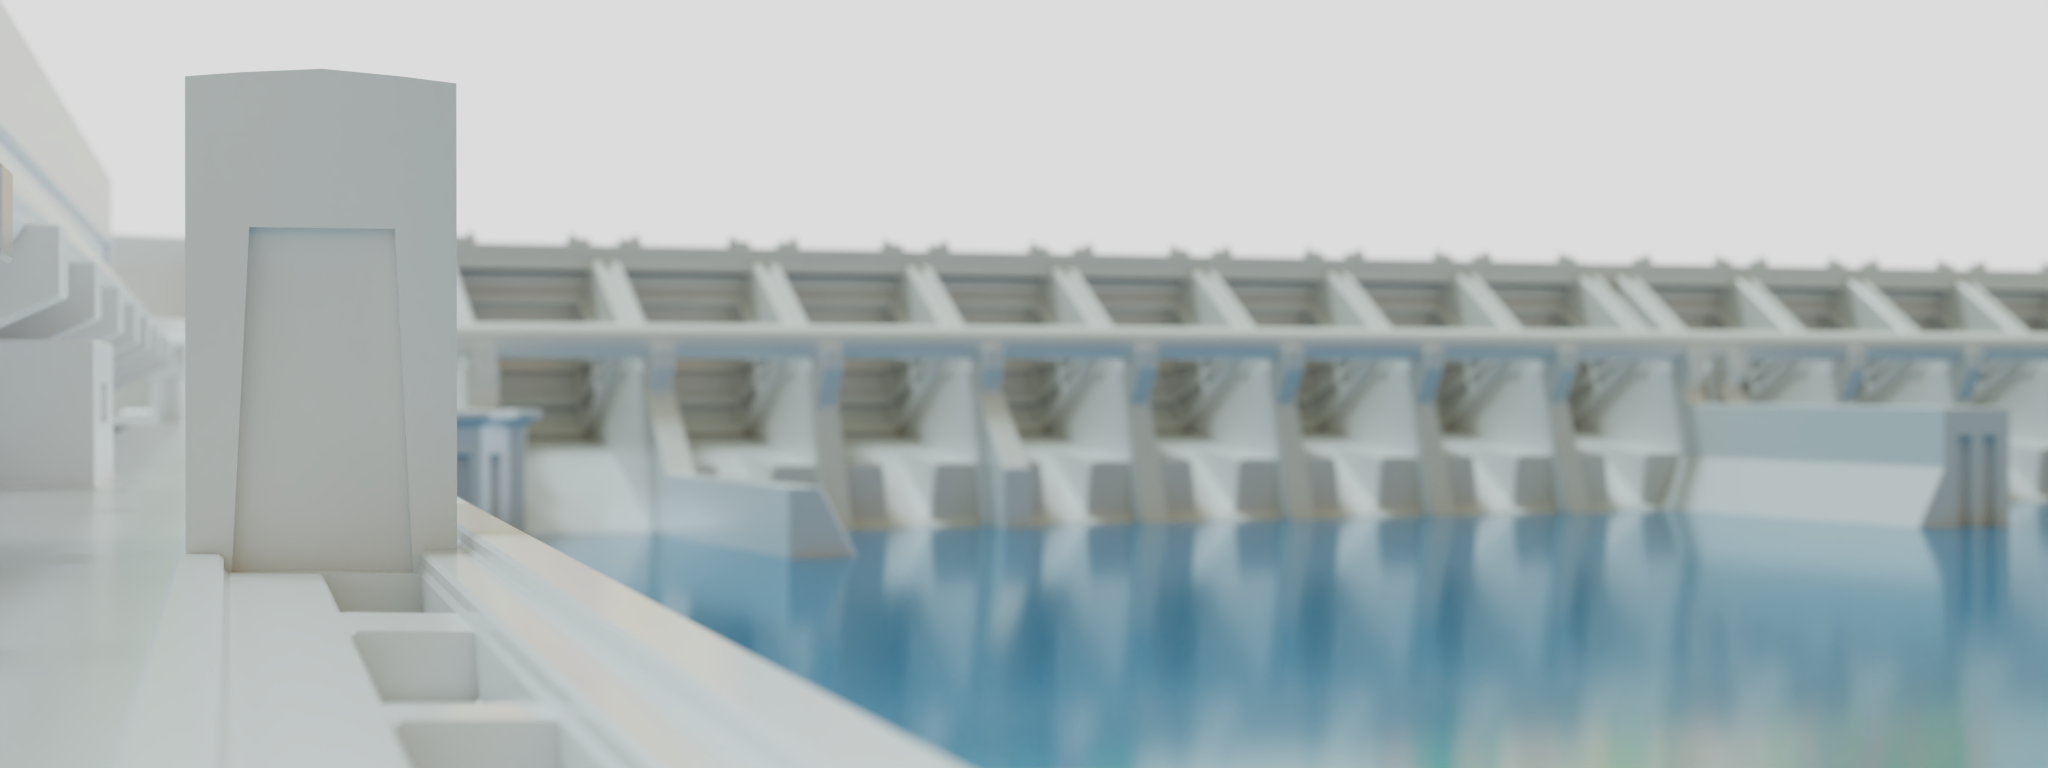 20240222 ROCKY REACH DAM_CONCEPT REALIZATIONS_0010.png